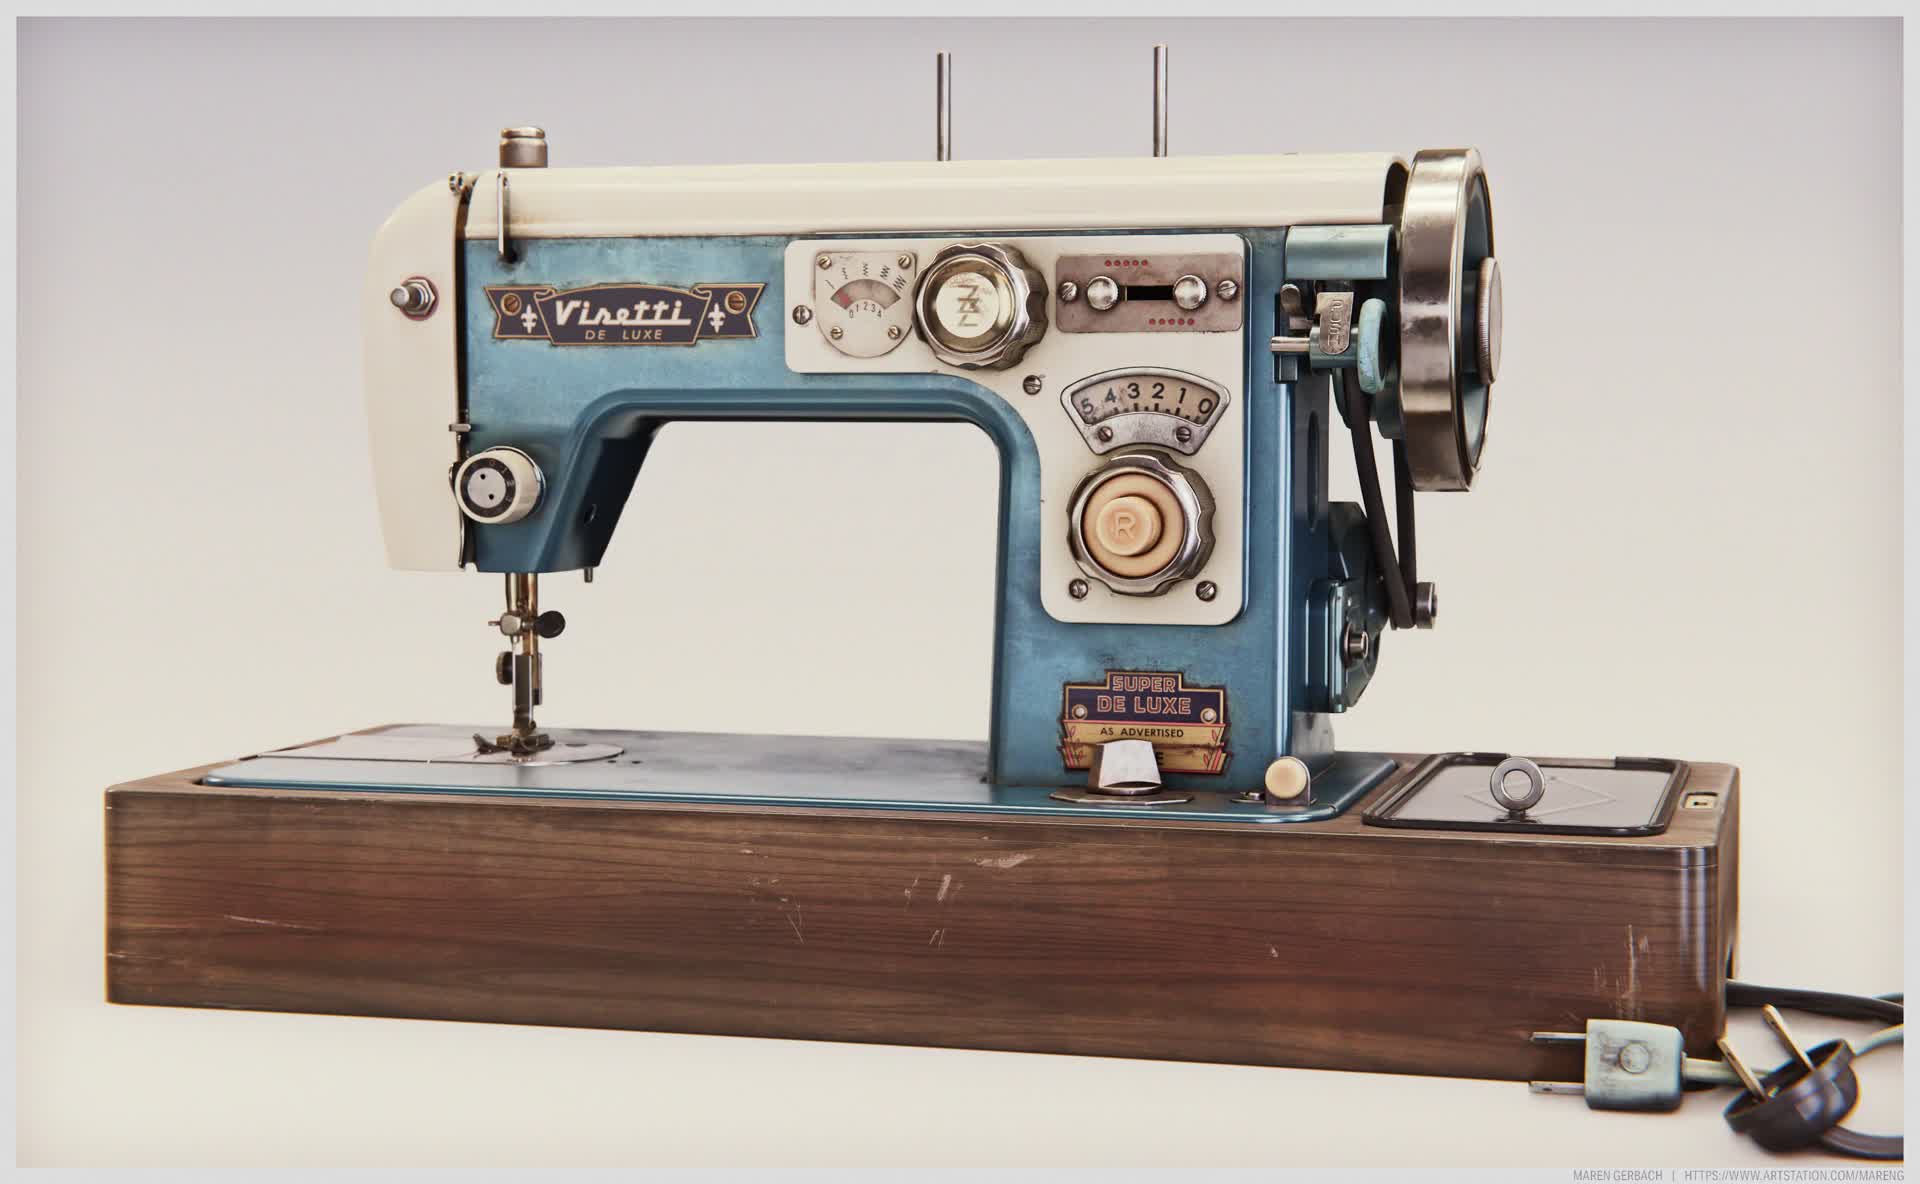 VINTAGE VISETTI SUPER DE LUXE ZIG ZAG SEWING MACHINE (AS ADVERTISED IN LIFE)